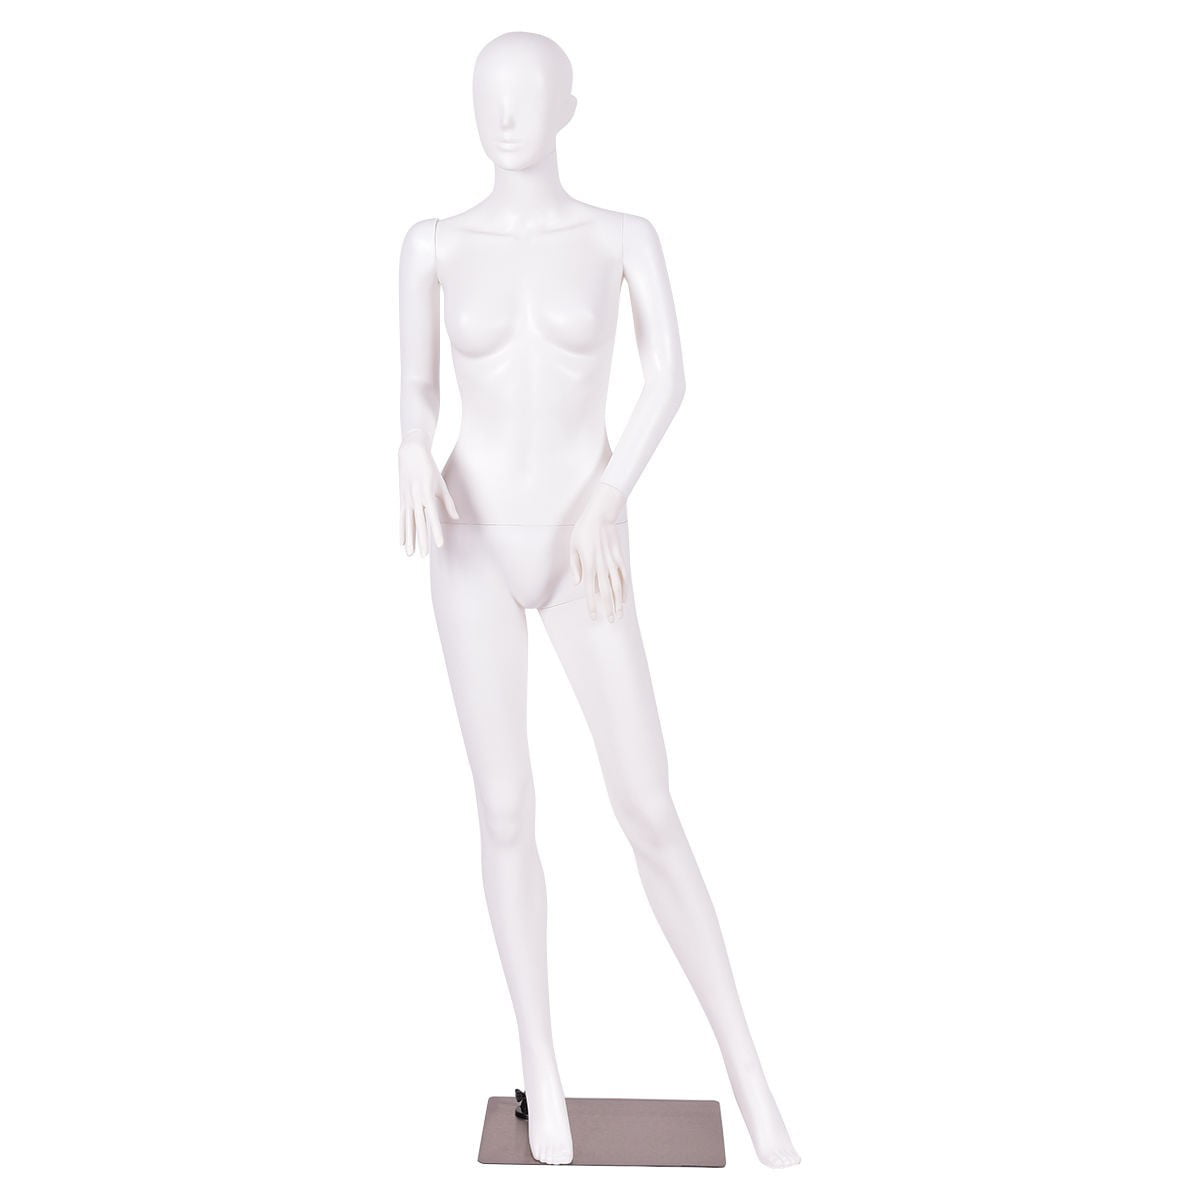 5.8 FT Female Mannequin Egghead Manikin with Metal Stand 